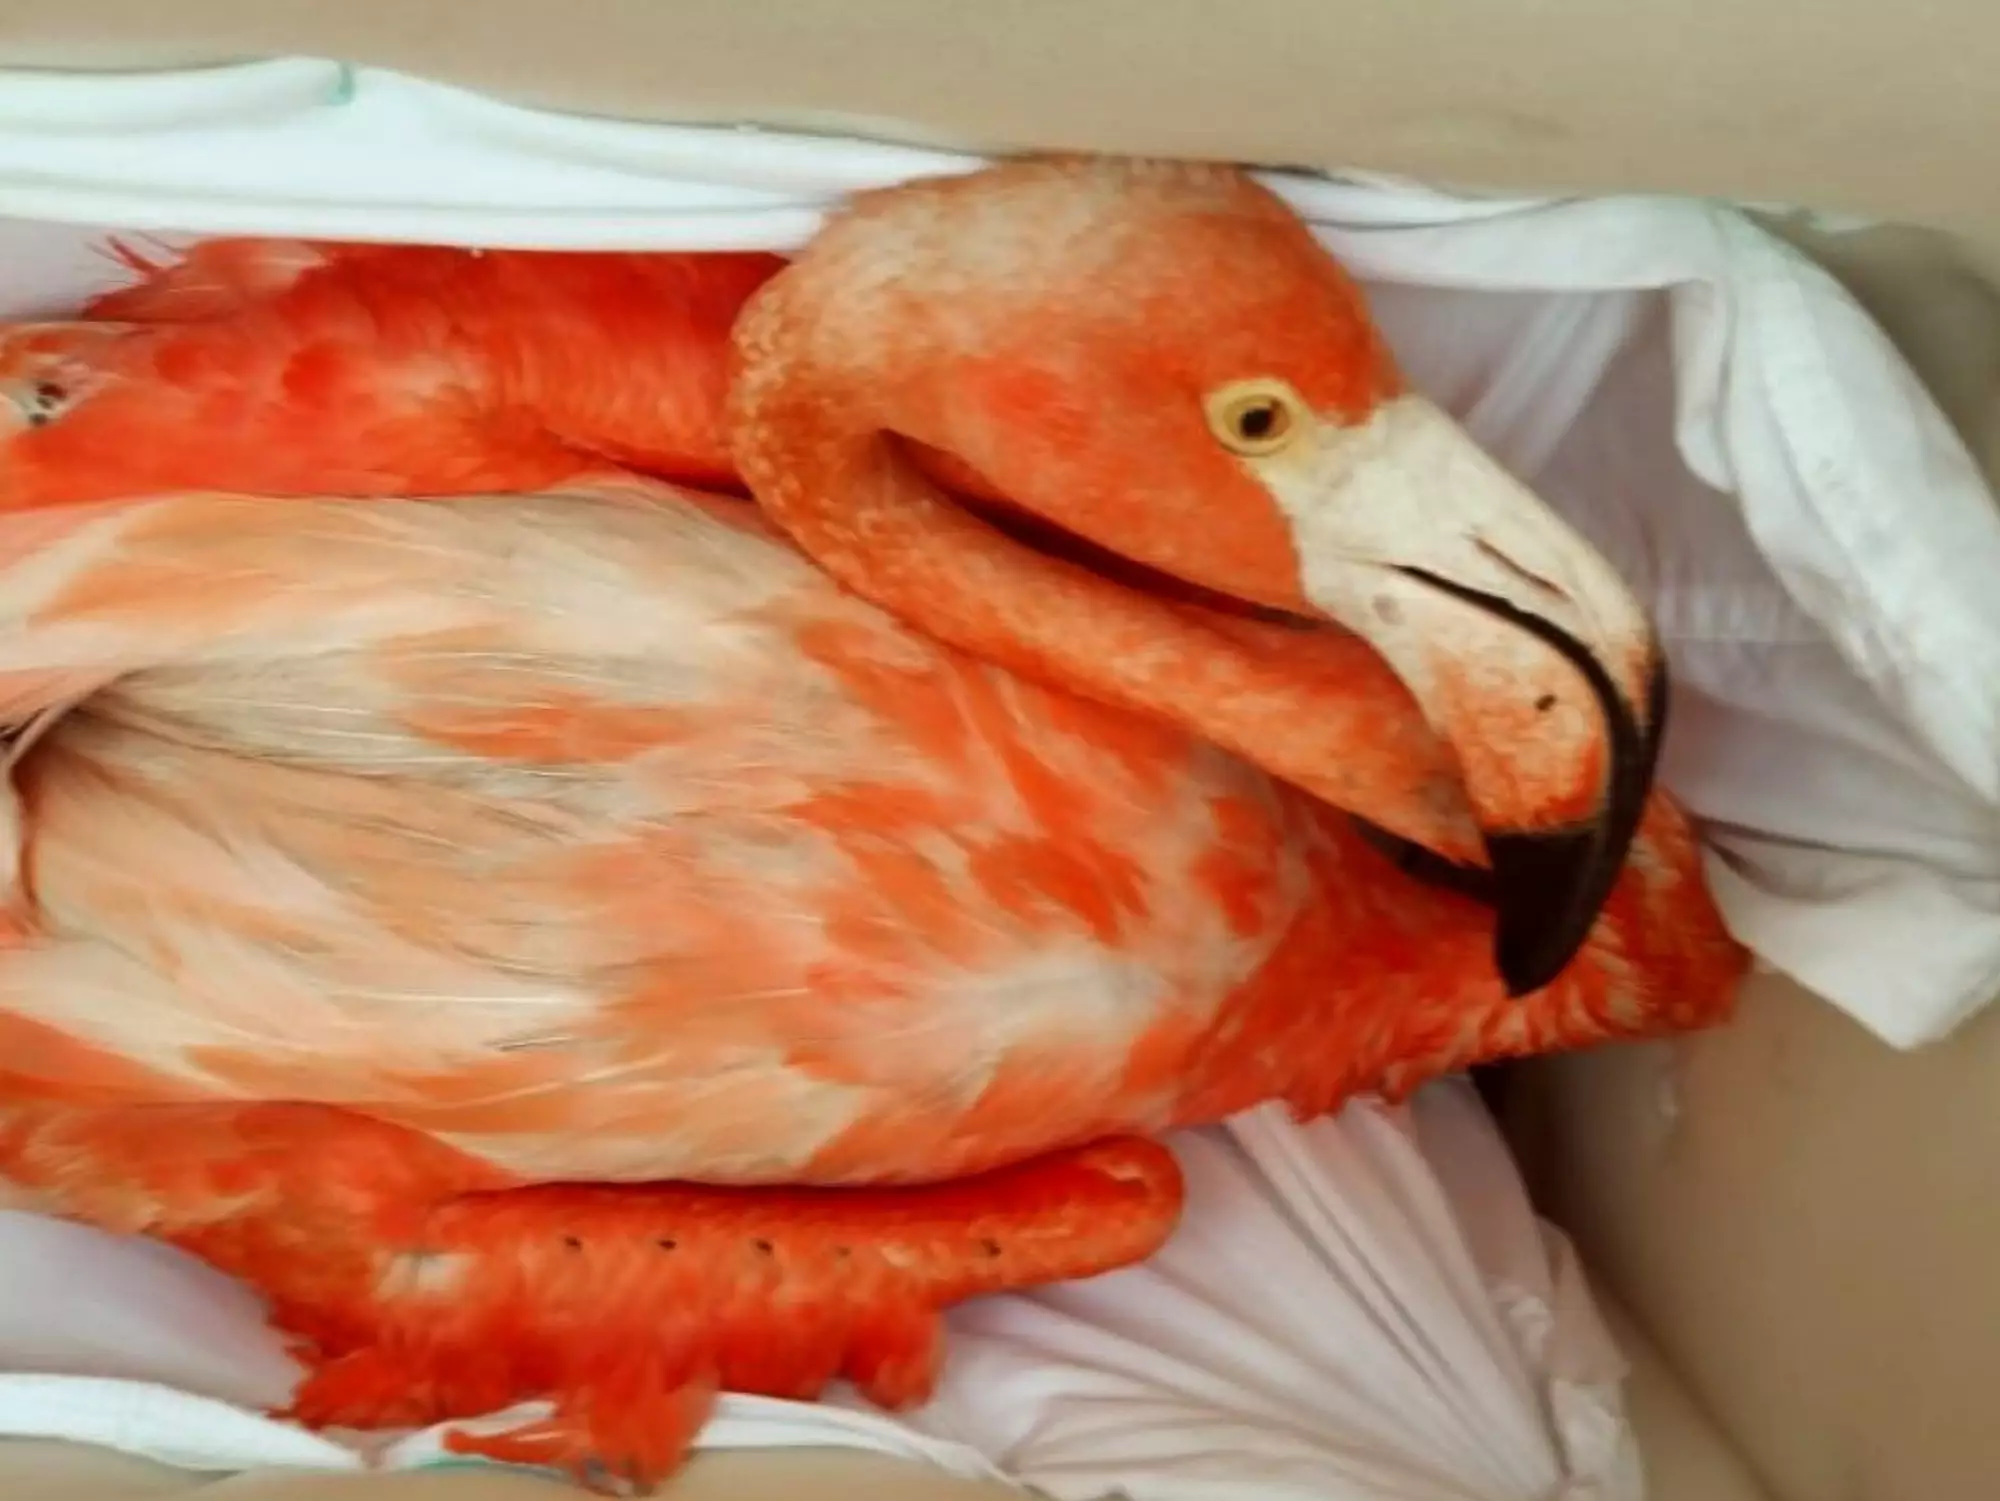 The surviving birds were found to be in very poor health.